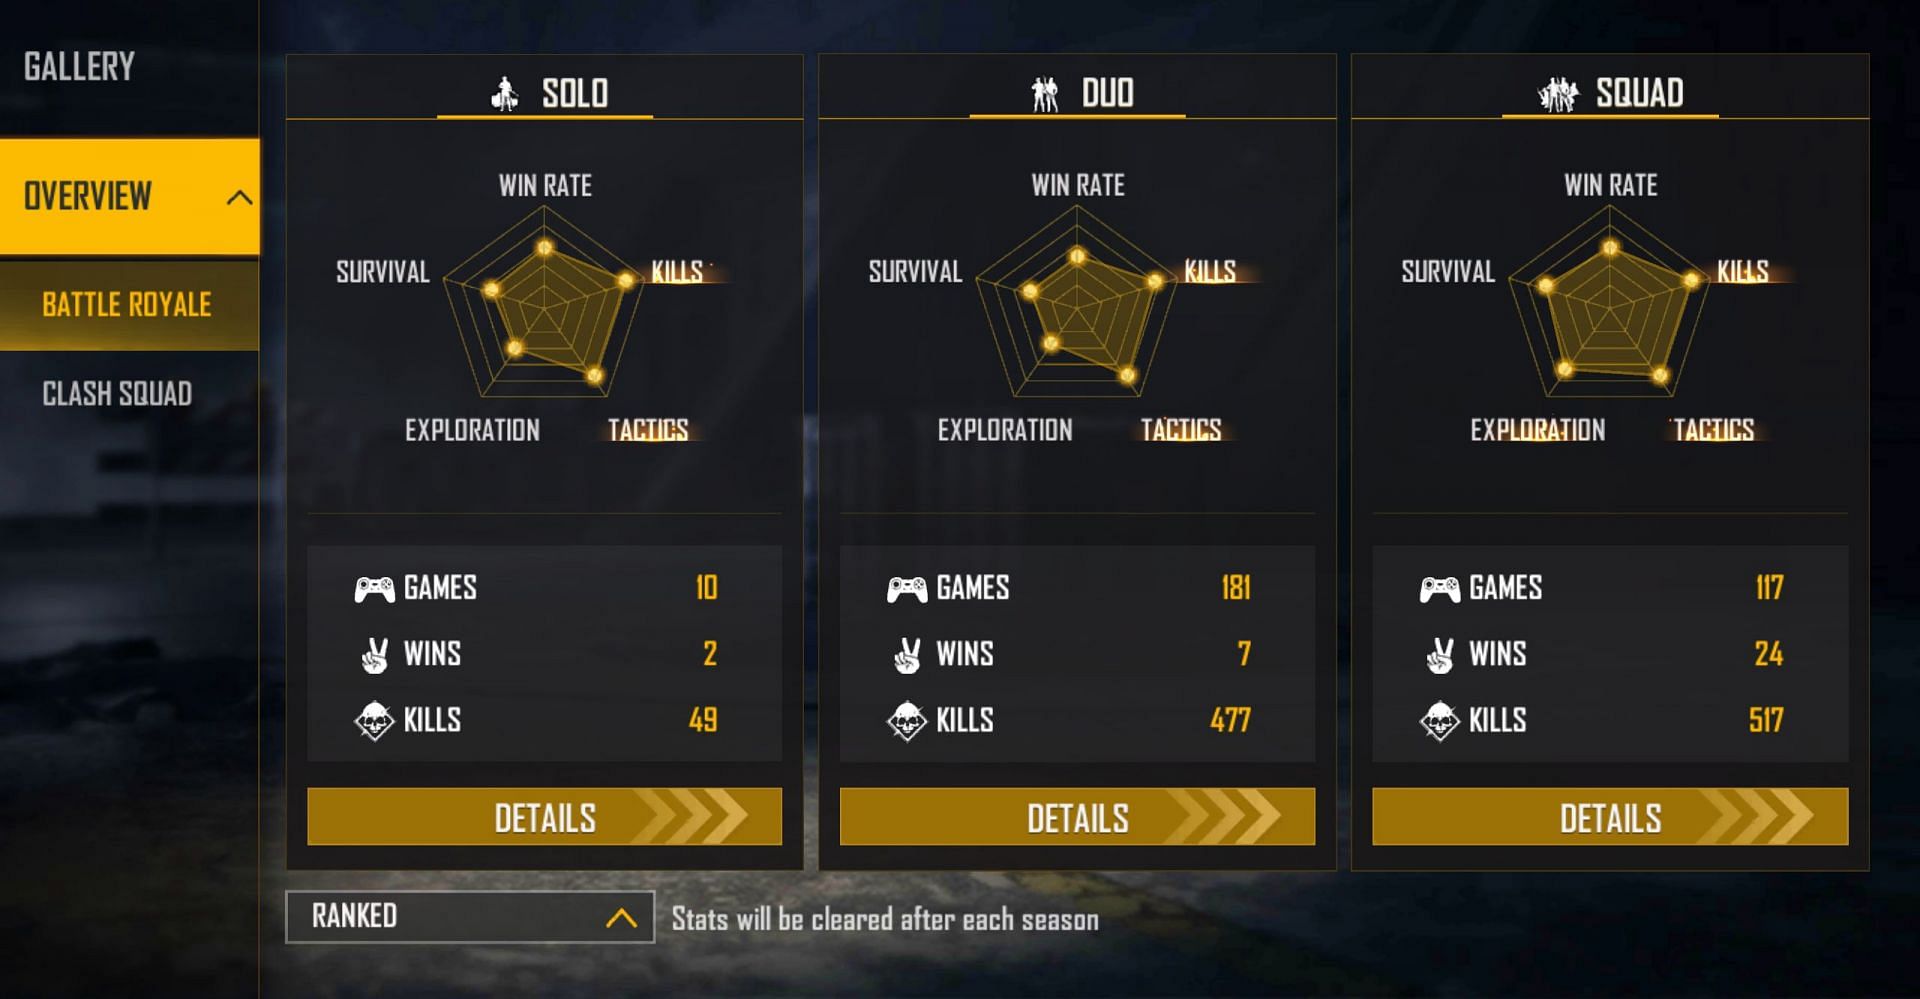 He has incredible ranked stats (Image via Free Fire)